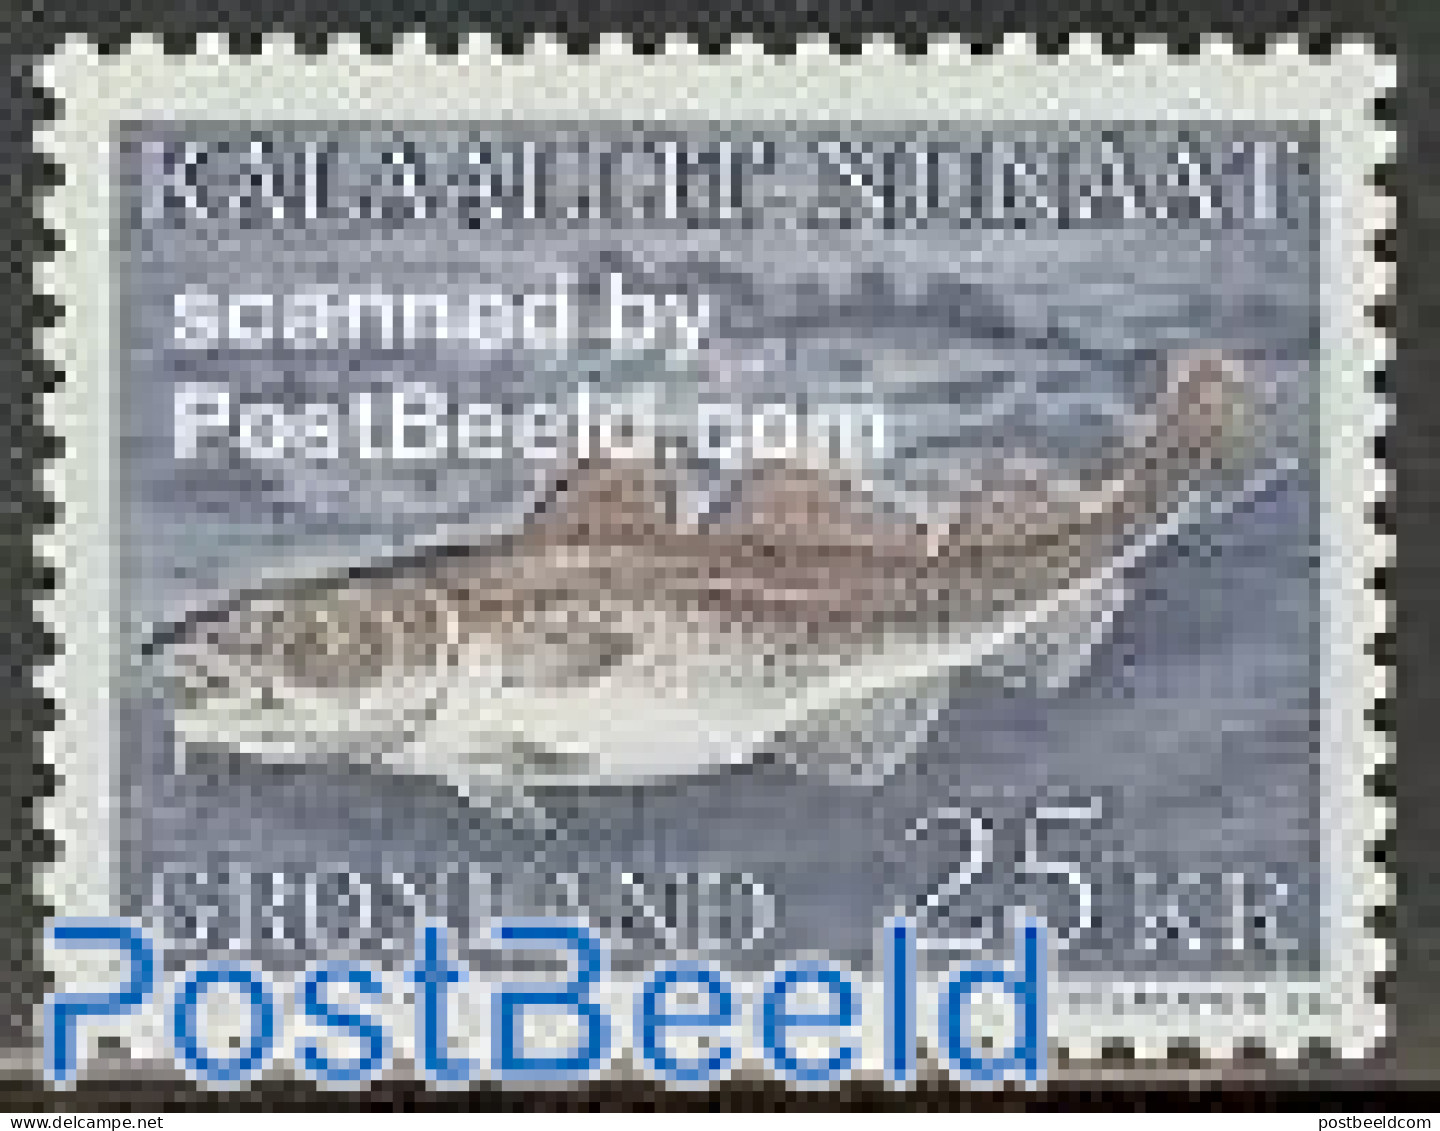 Greenland 1981 Fish 1v, Mint NH, Nature - Fish - Unused Stamps